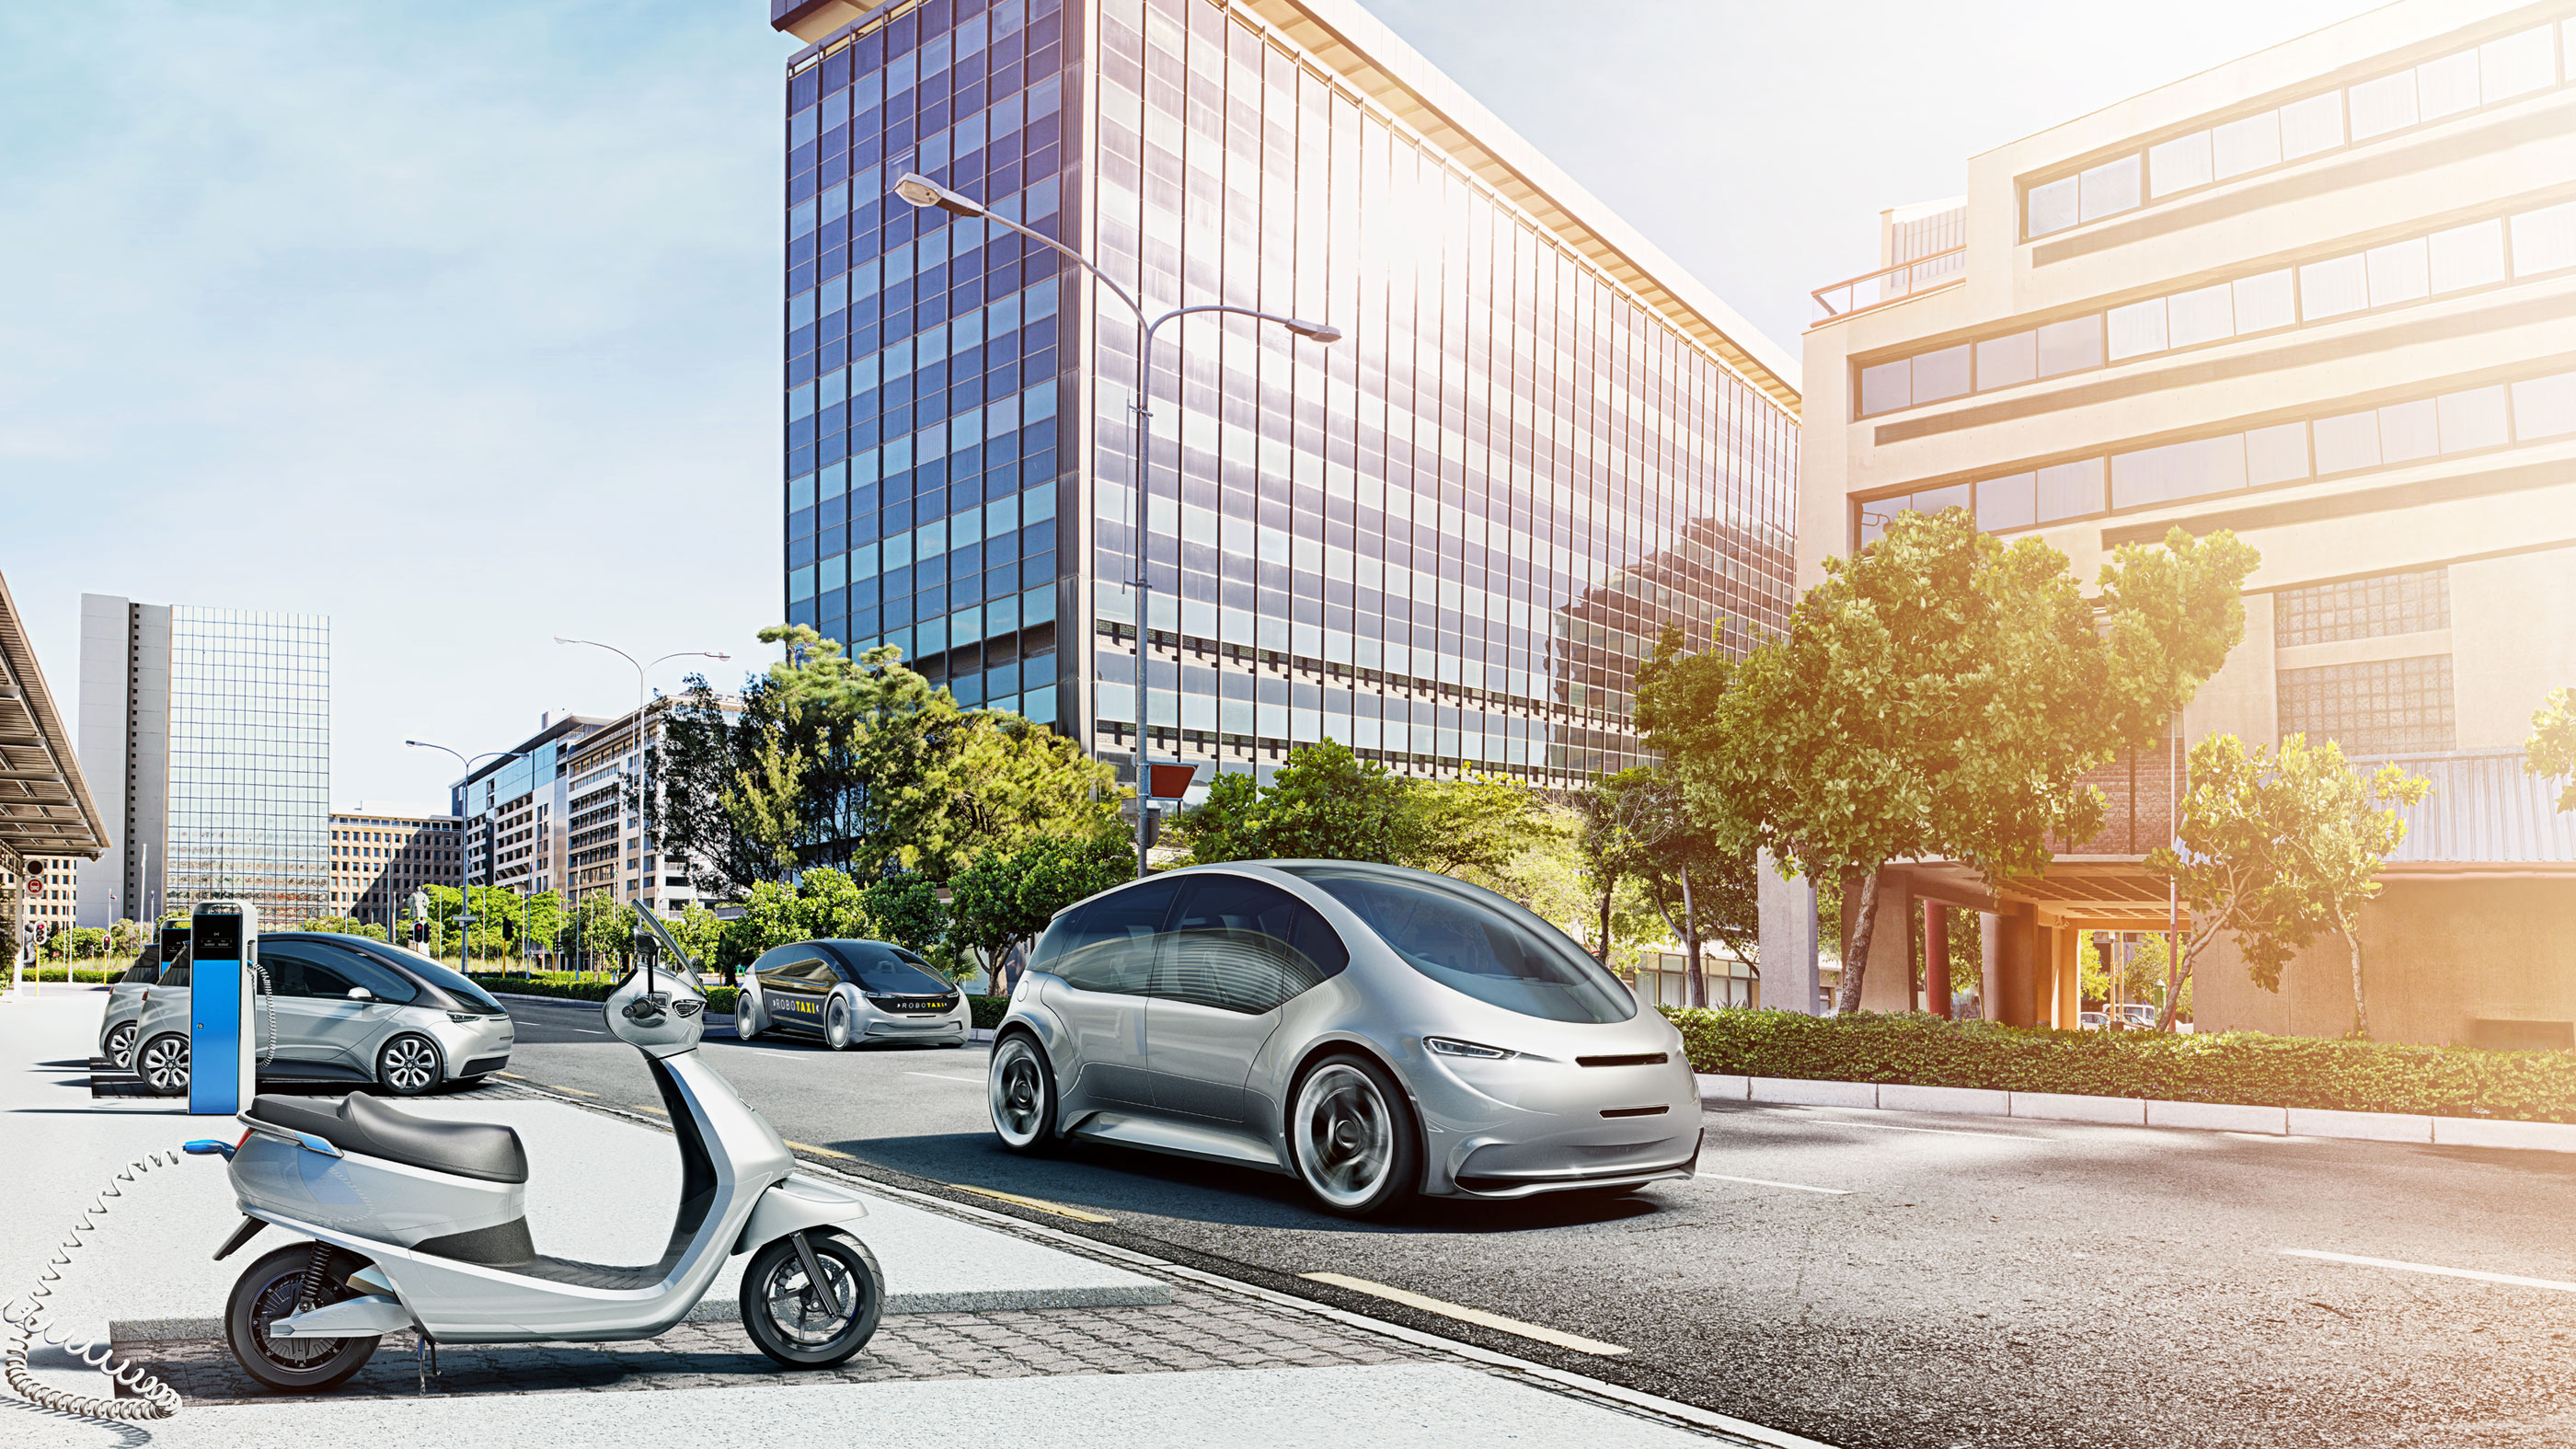 Electrified mobility and systems are the future | Bosch Global